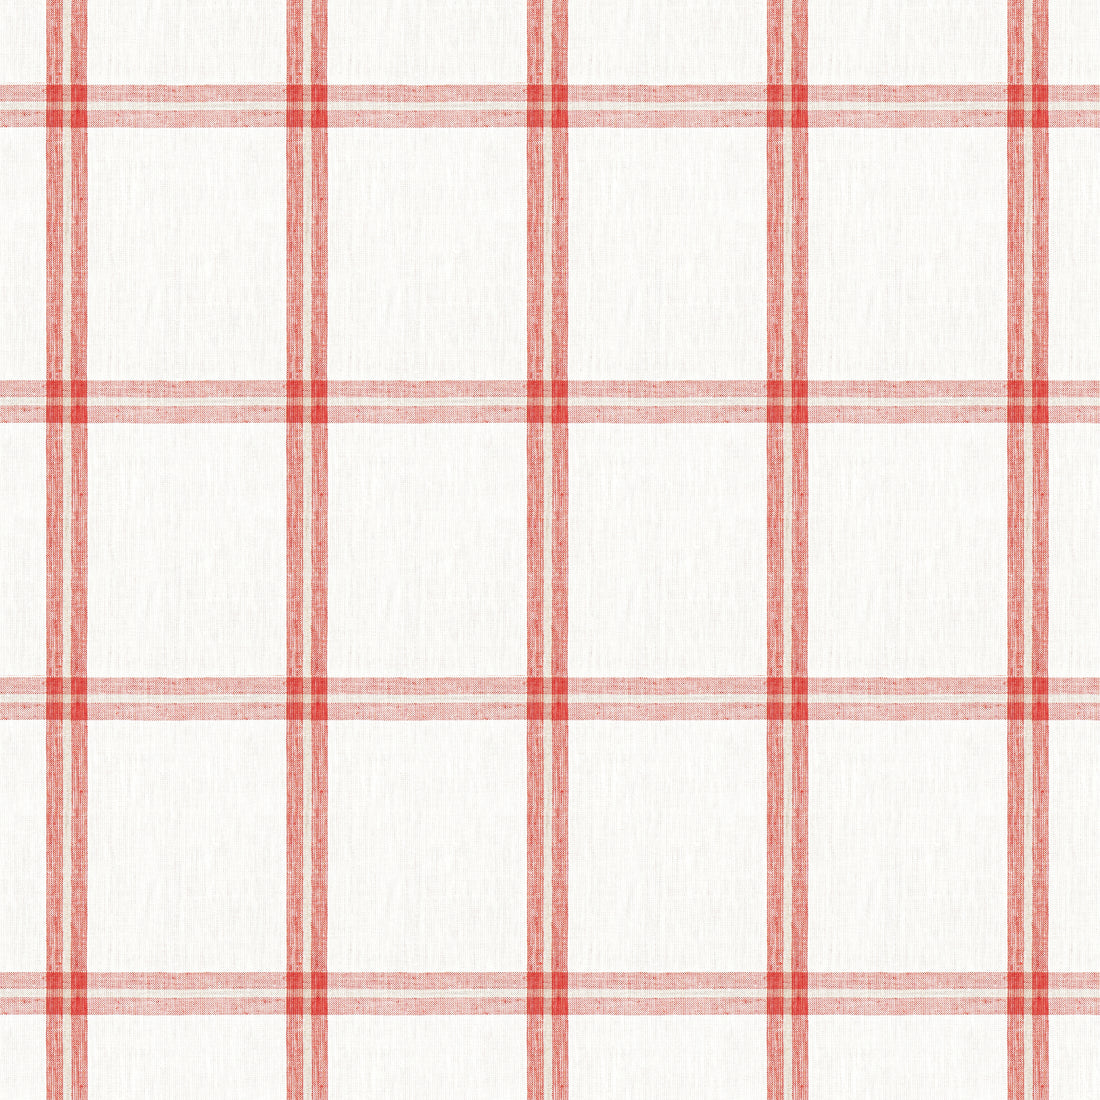 Huntington Plaid fabric in sunbaked color - pattern number W781334 - by Thibaut in the Montecito collection